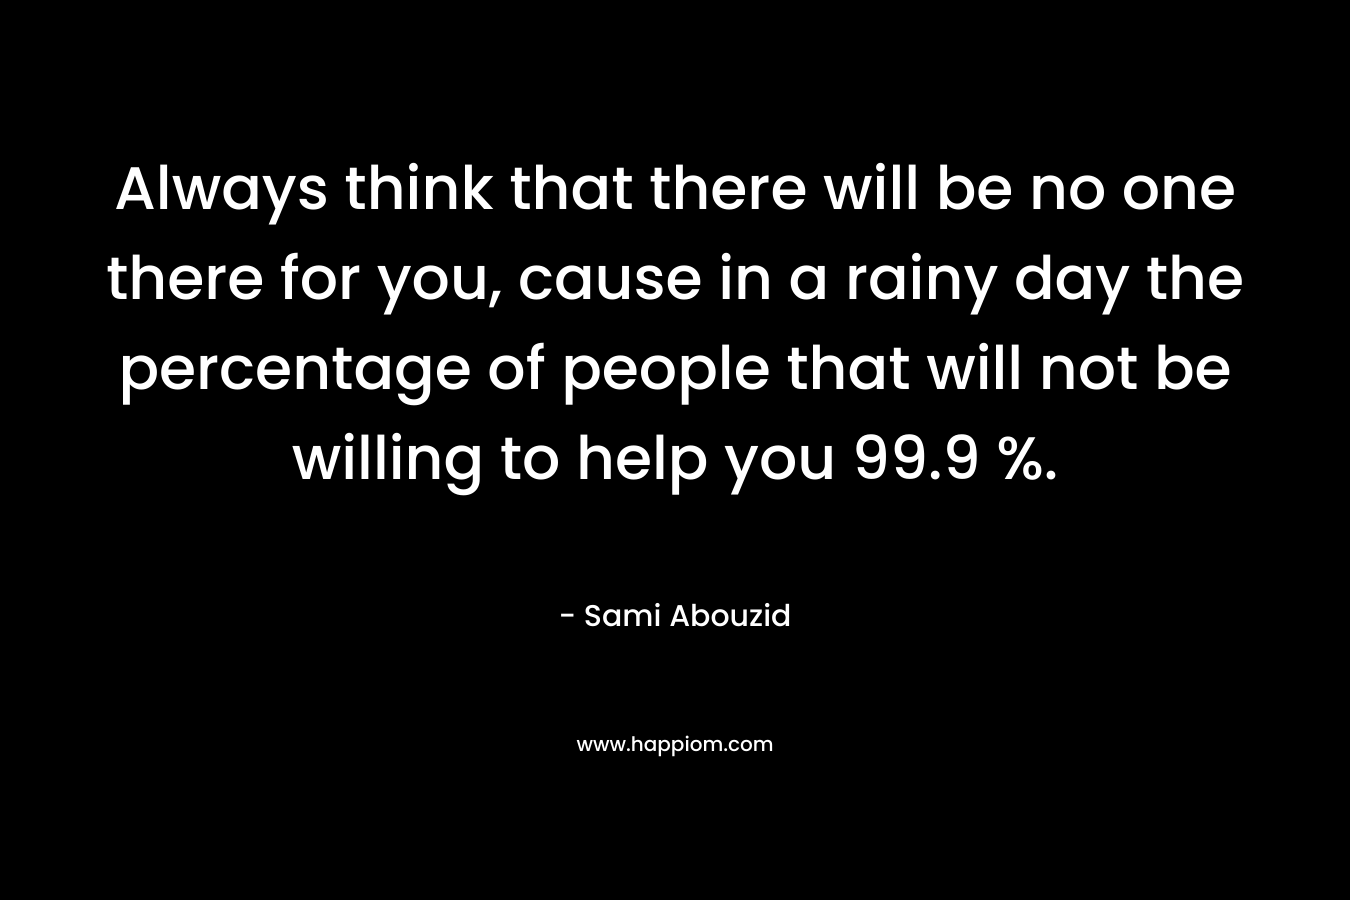 Always think that there will be no one there for you, cause in a rainy day the percentage of people that will not be willing to help you 99.9 %.